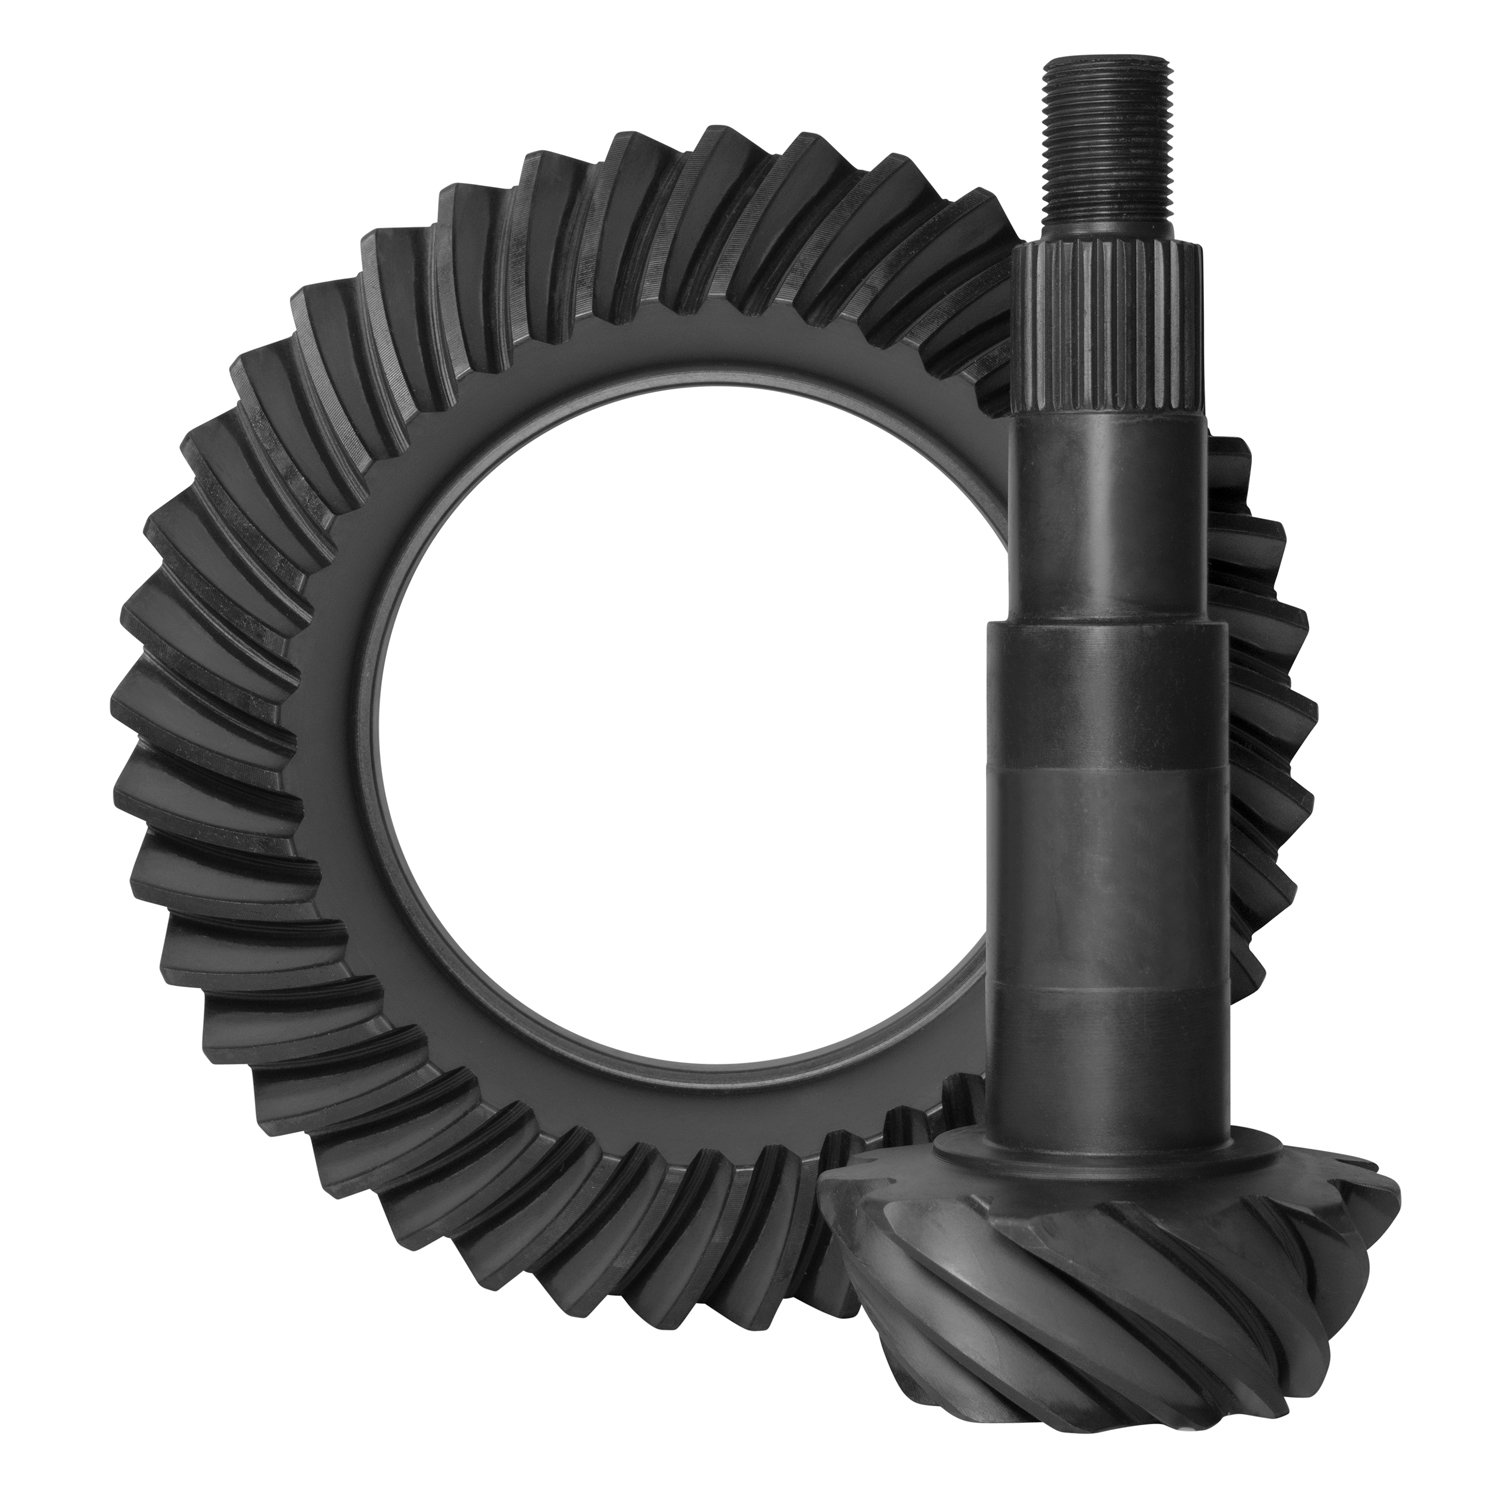 USA Standard ZG GM8.5-456 Ring & Pinion Gear Set, For GM 8.5 in., 4.56 Ratio